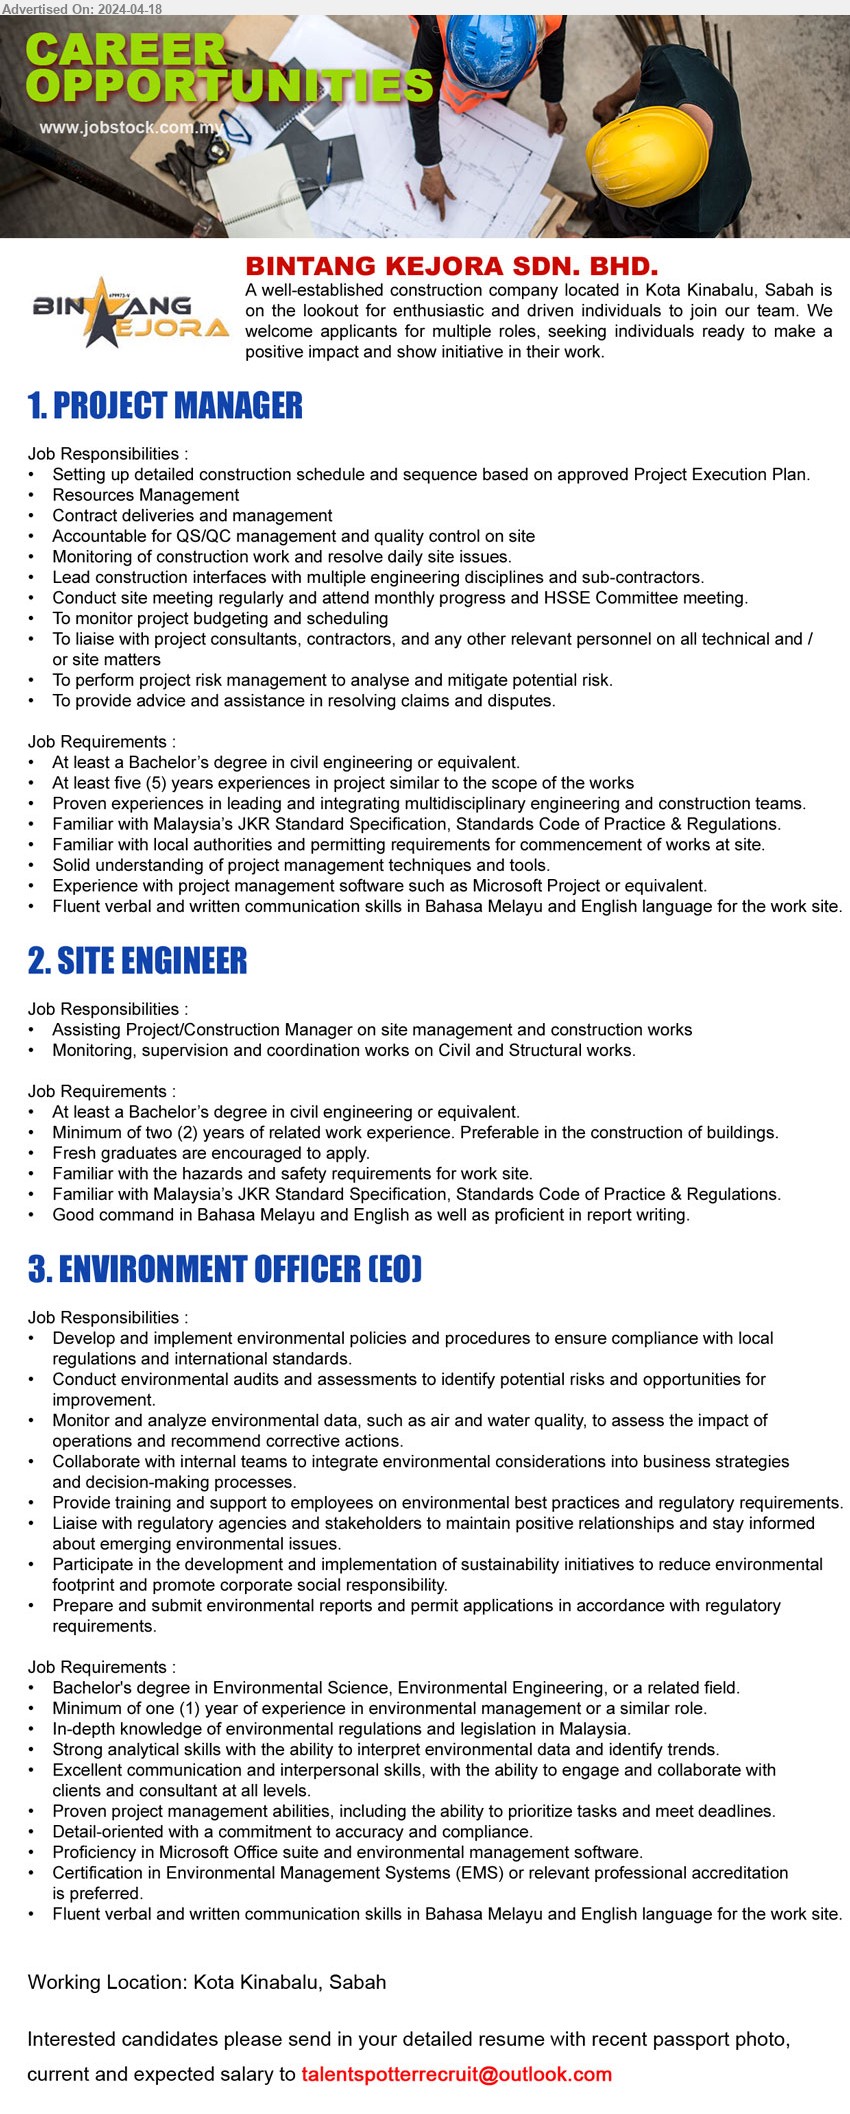 BINTANG KEJORA SDN BHD - 1. PROJECT MANAGER  (Kota Kinabalu, Sabah), Bachelor’s Degree in Civil Engineering or equivalent, at least 5 years experiences in project similar to the scope of the works...
2. SITE ENGINEER (Kota Kinabalu, Sabah), At least a Bachelor’s Degree in Civil Engineering or equivalent. min. 2 years of related work experience. Preferable in the construction of buildings.,...
3. ENVIRONMENT OFFICER (EO) (Kota Kinabalu, Sabah), degree in Environmental Science, Environmental Engineering, or a related field, min. 1 year of experience in environmental management or a similar role.,...
Email resume to...